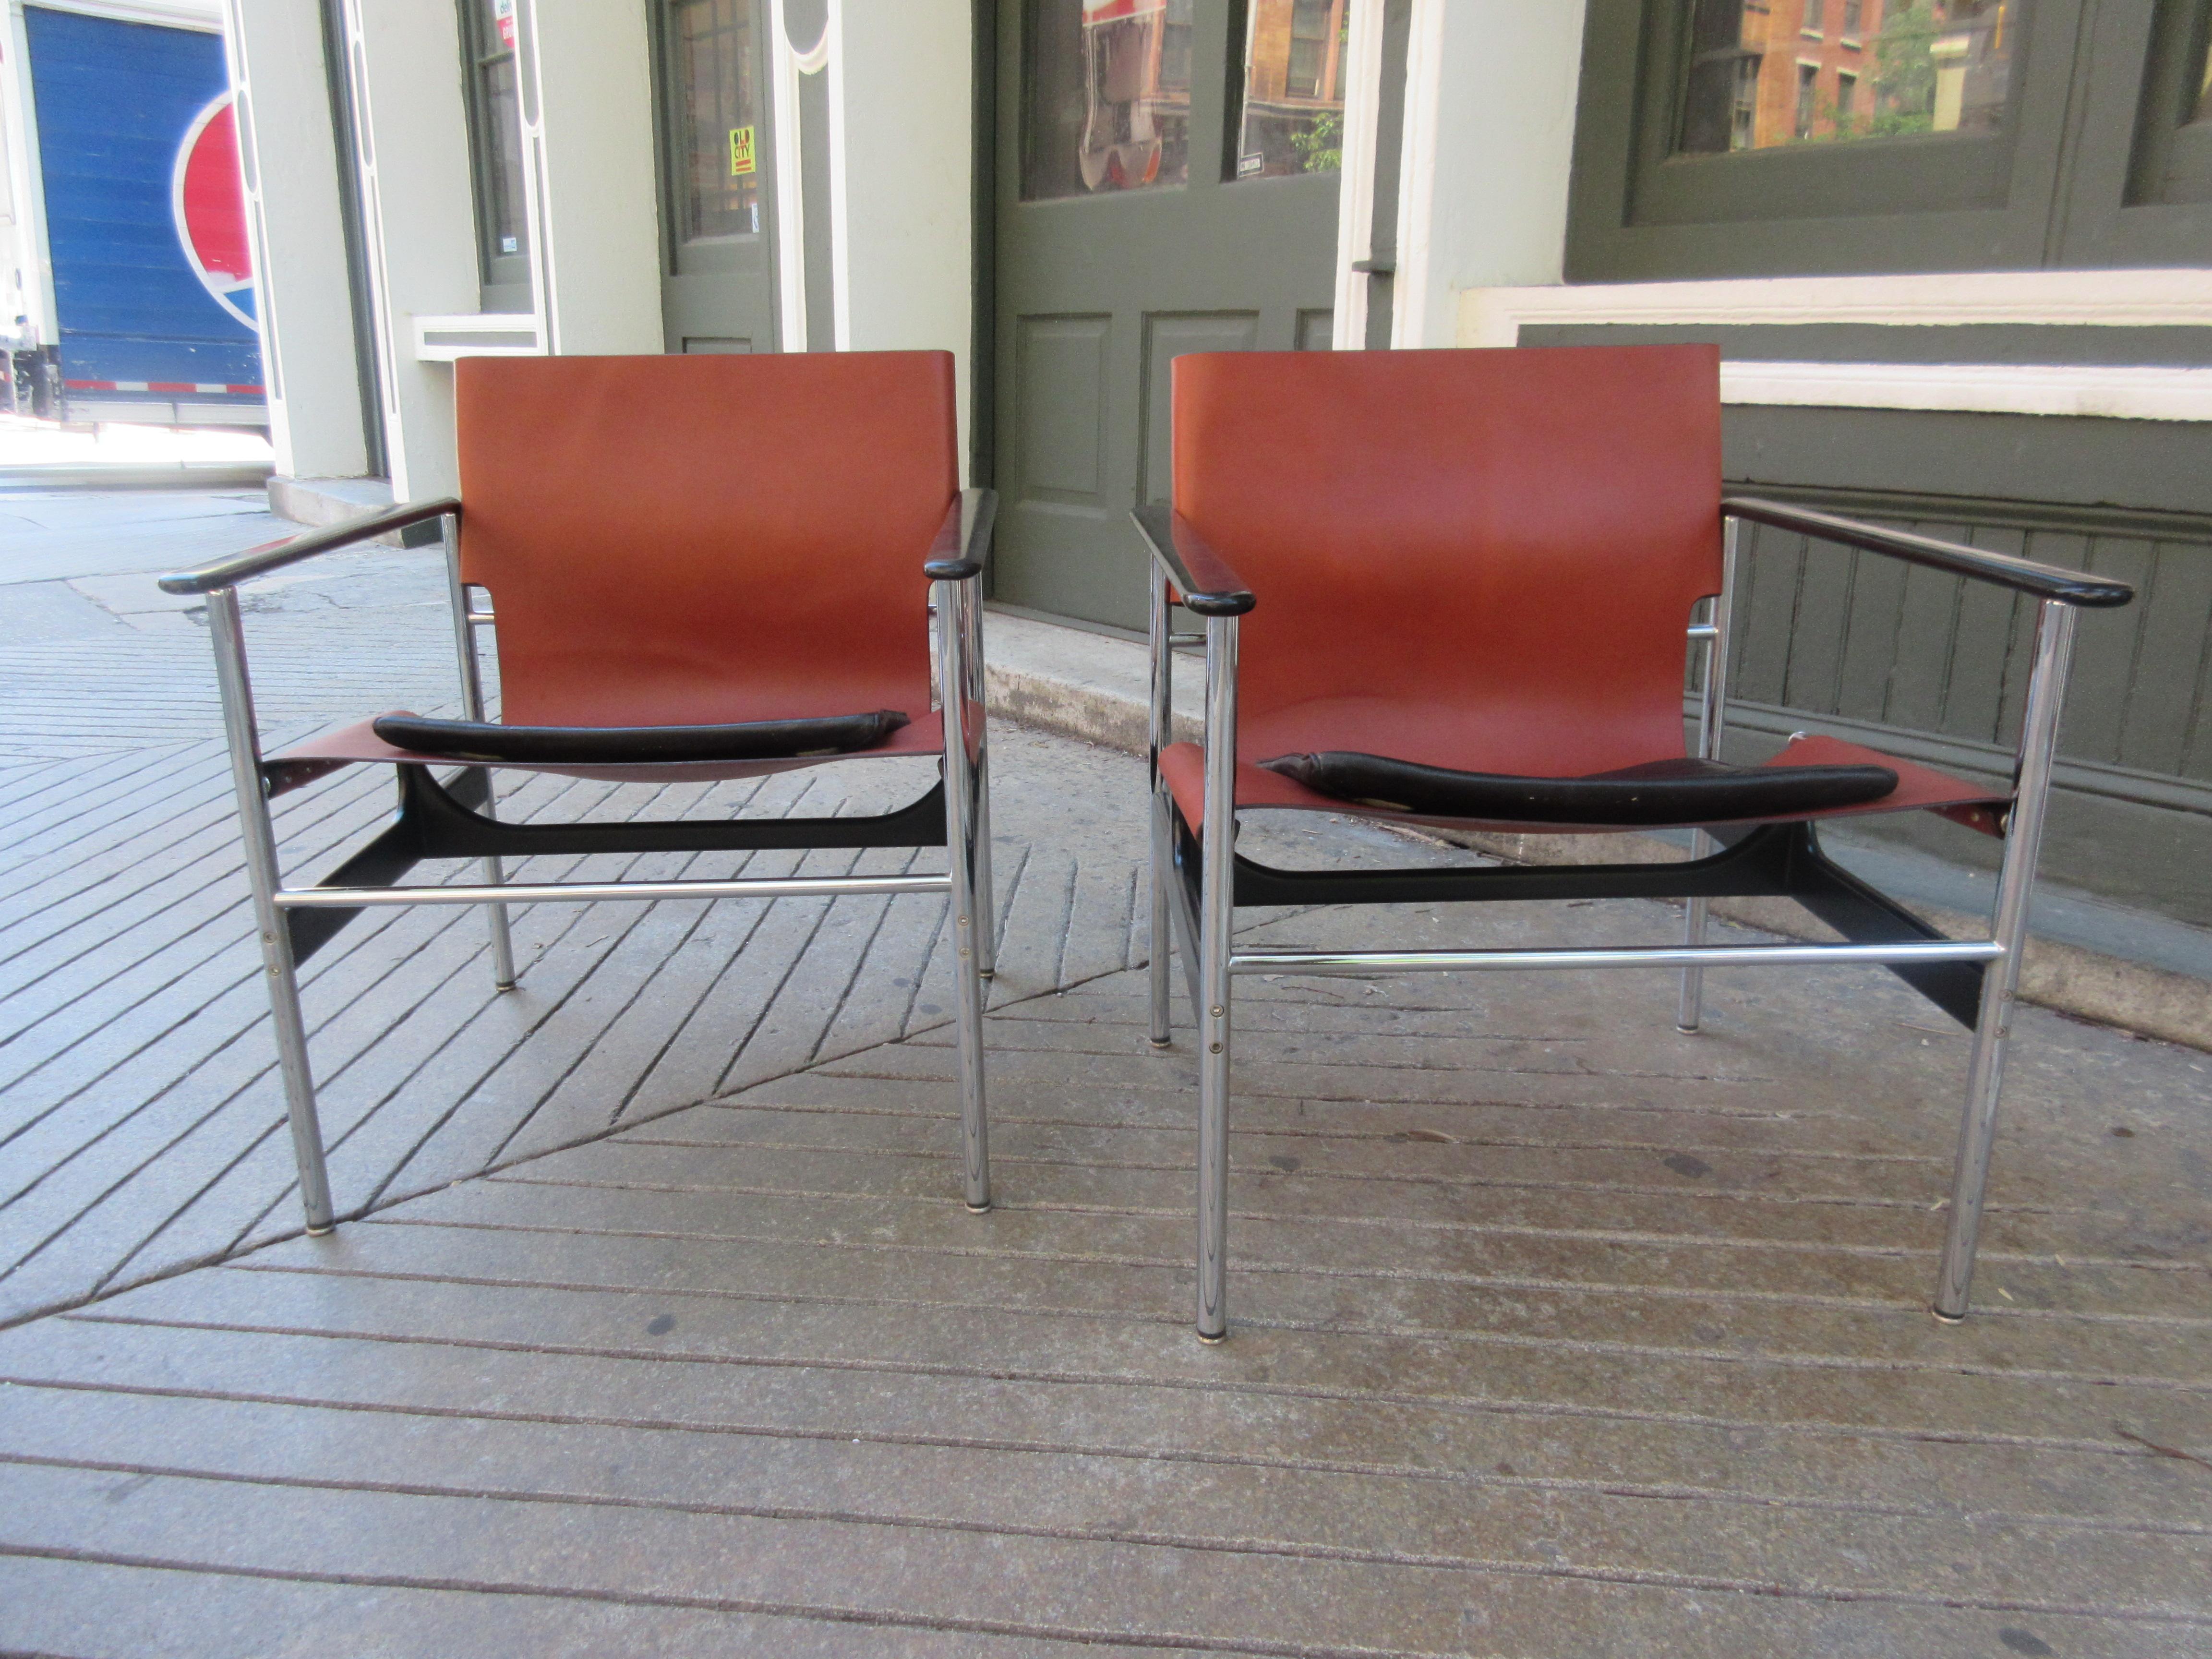 Charles Pollack for Knoll Model 657 leather sling chairs in chestnut leather slings with original black seat cushion. Leather slings are newly redone. Chrome and plastic arms are in excellent original condition.